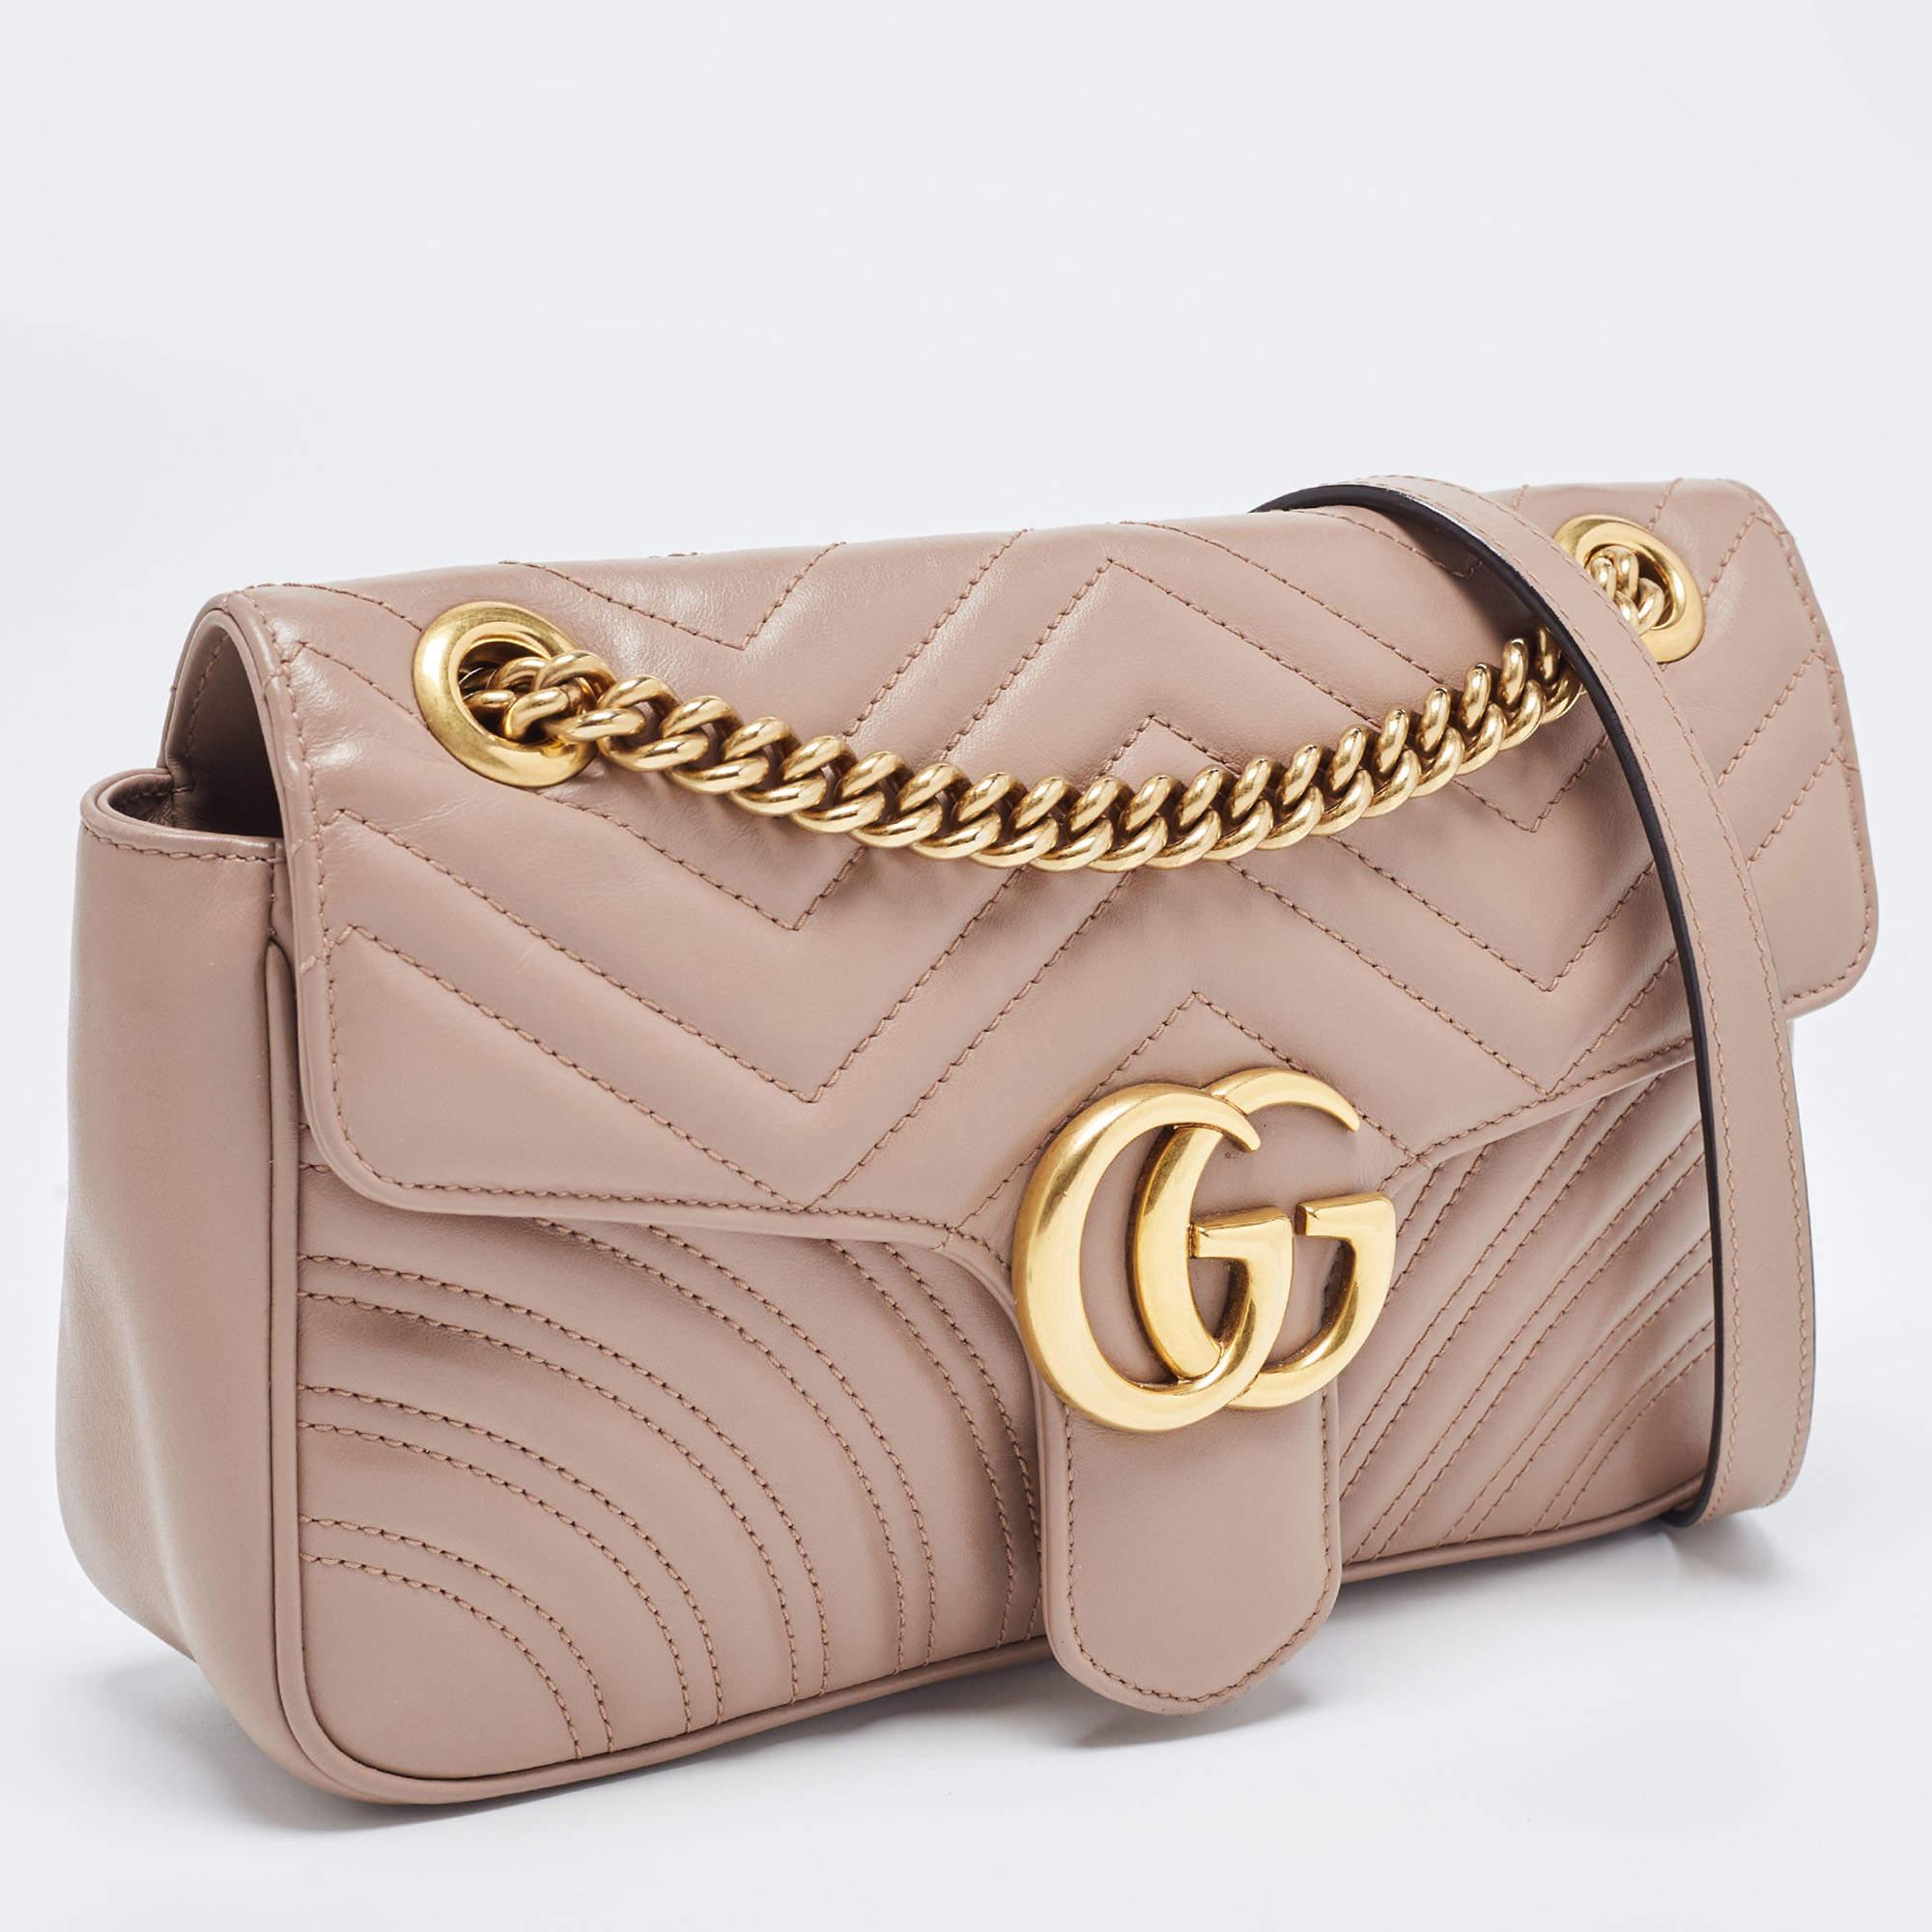 Innovative and sophisticated, this Gucci GG Marmont shoulder bag is a timeless piece that can last you season after season. This bag is finely crafted from matelassé leather and gets a luxe update with a 'GG' motif on the front. It can be carried